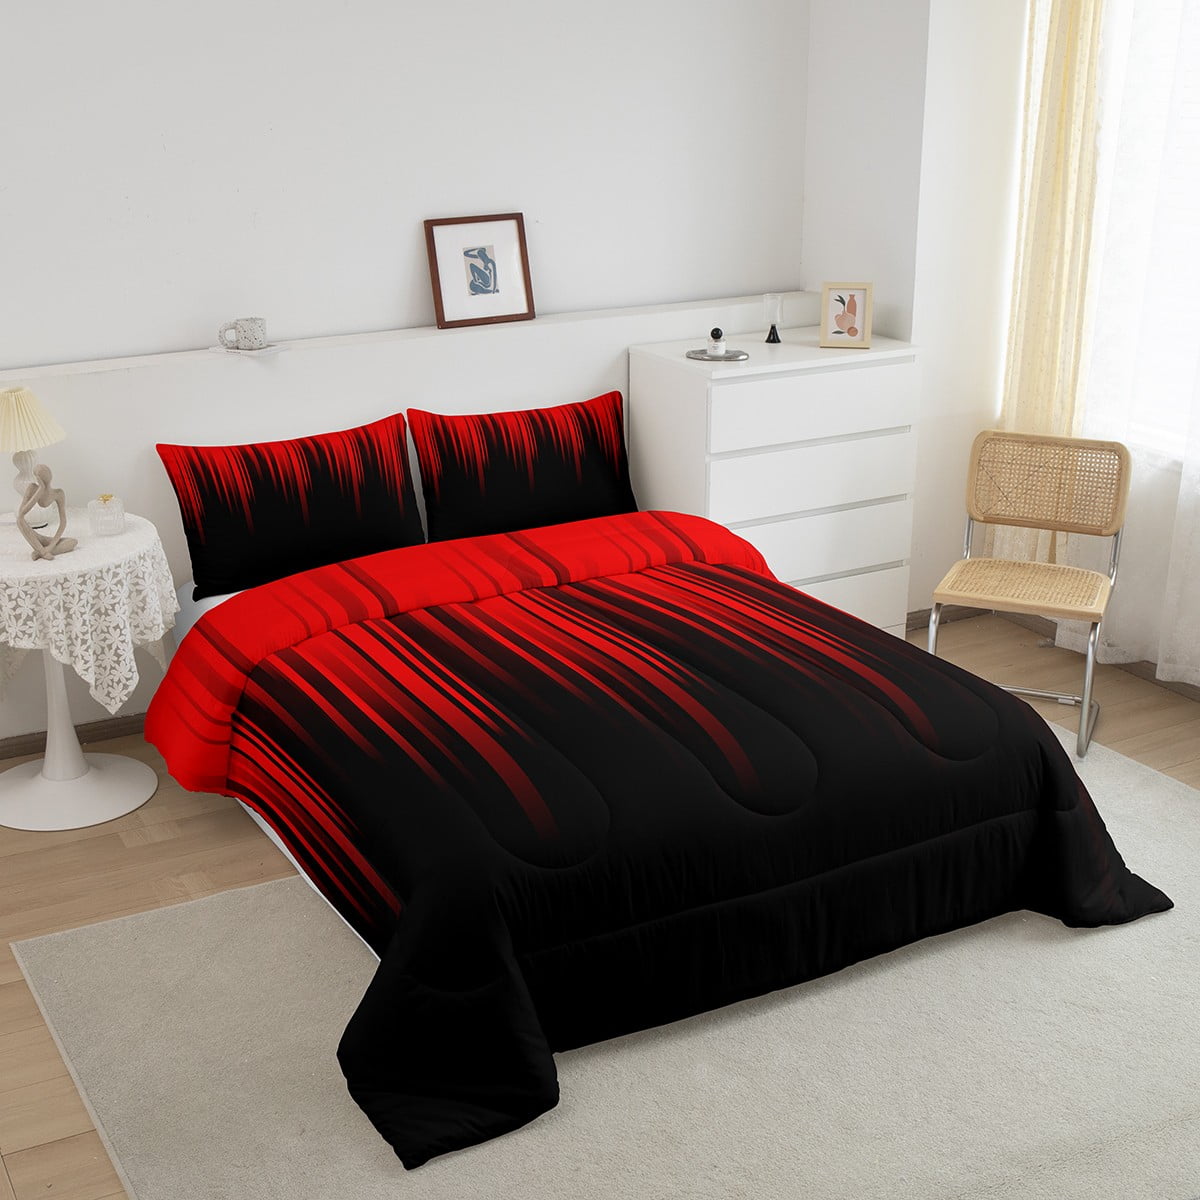 Gradient Comforter Set Red Blue Ombre Abstract Art Bedding